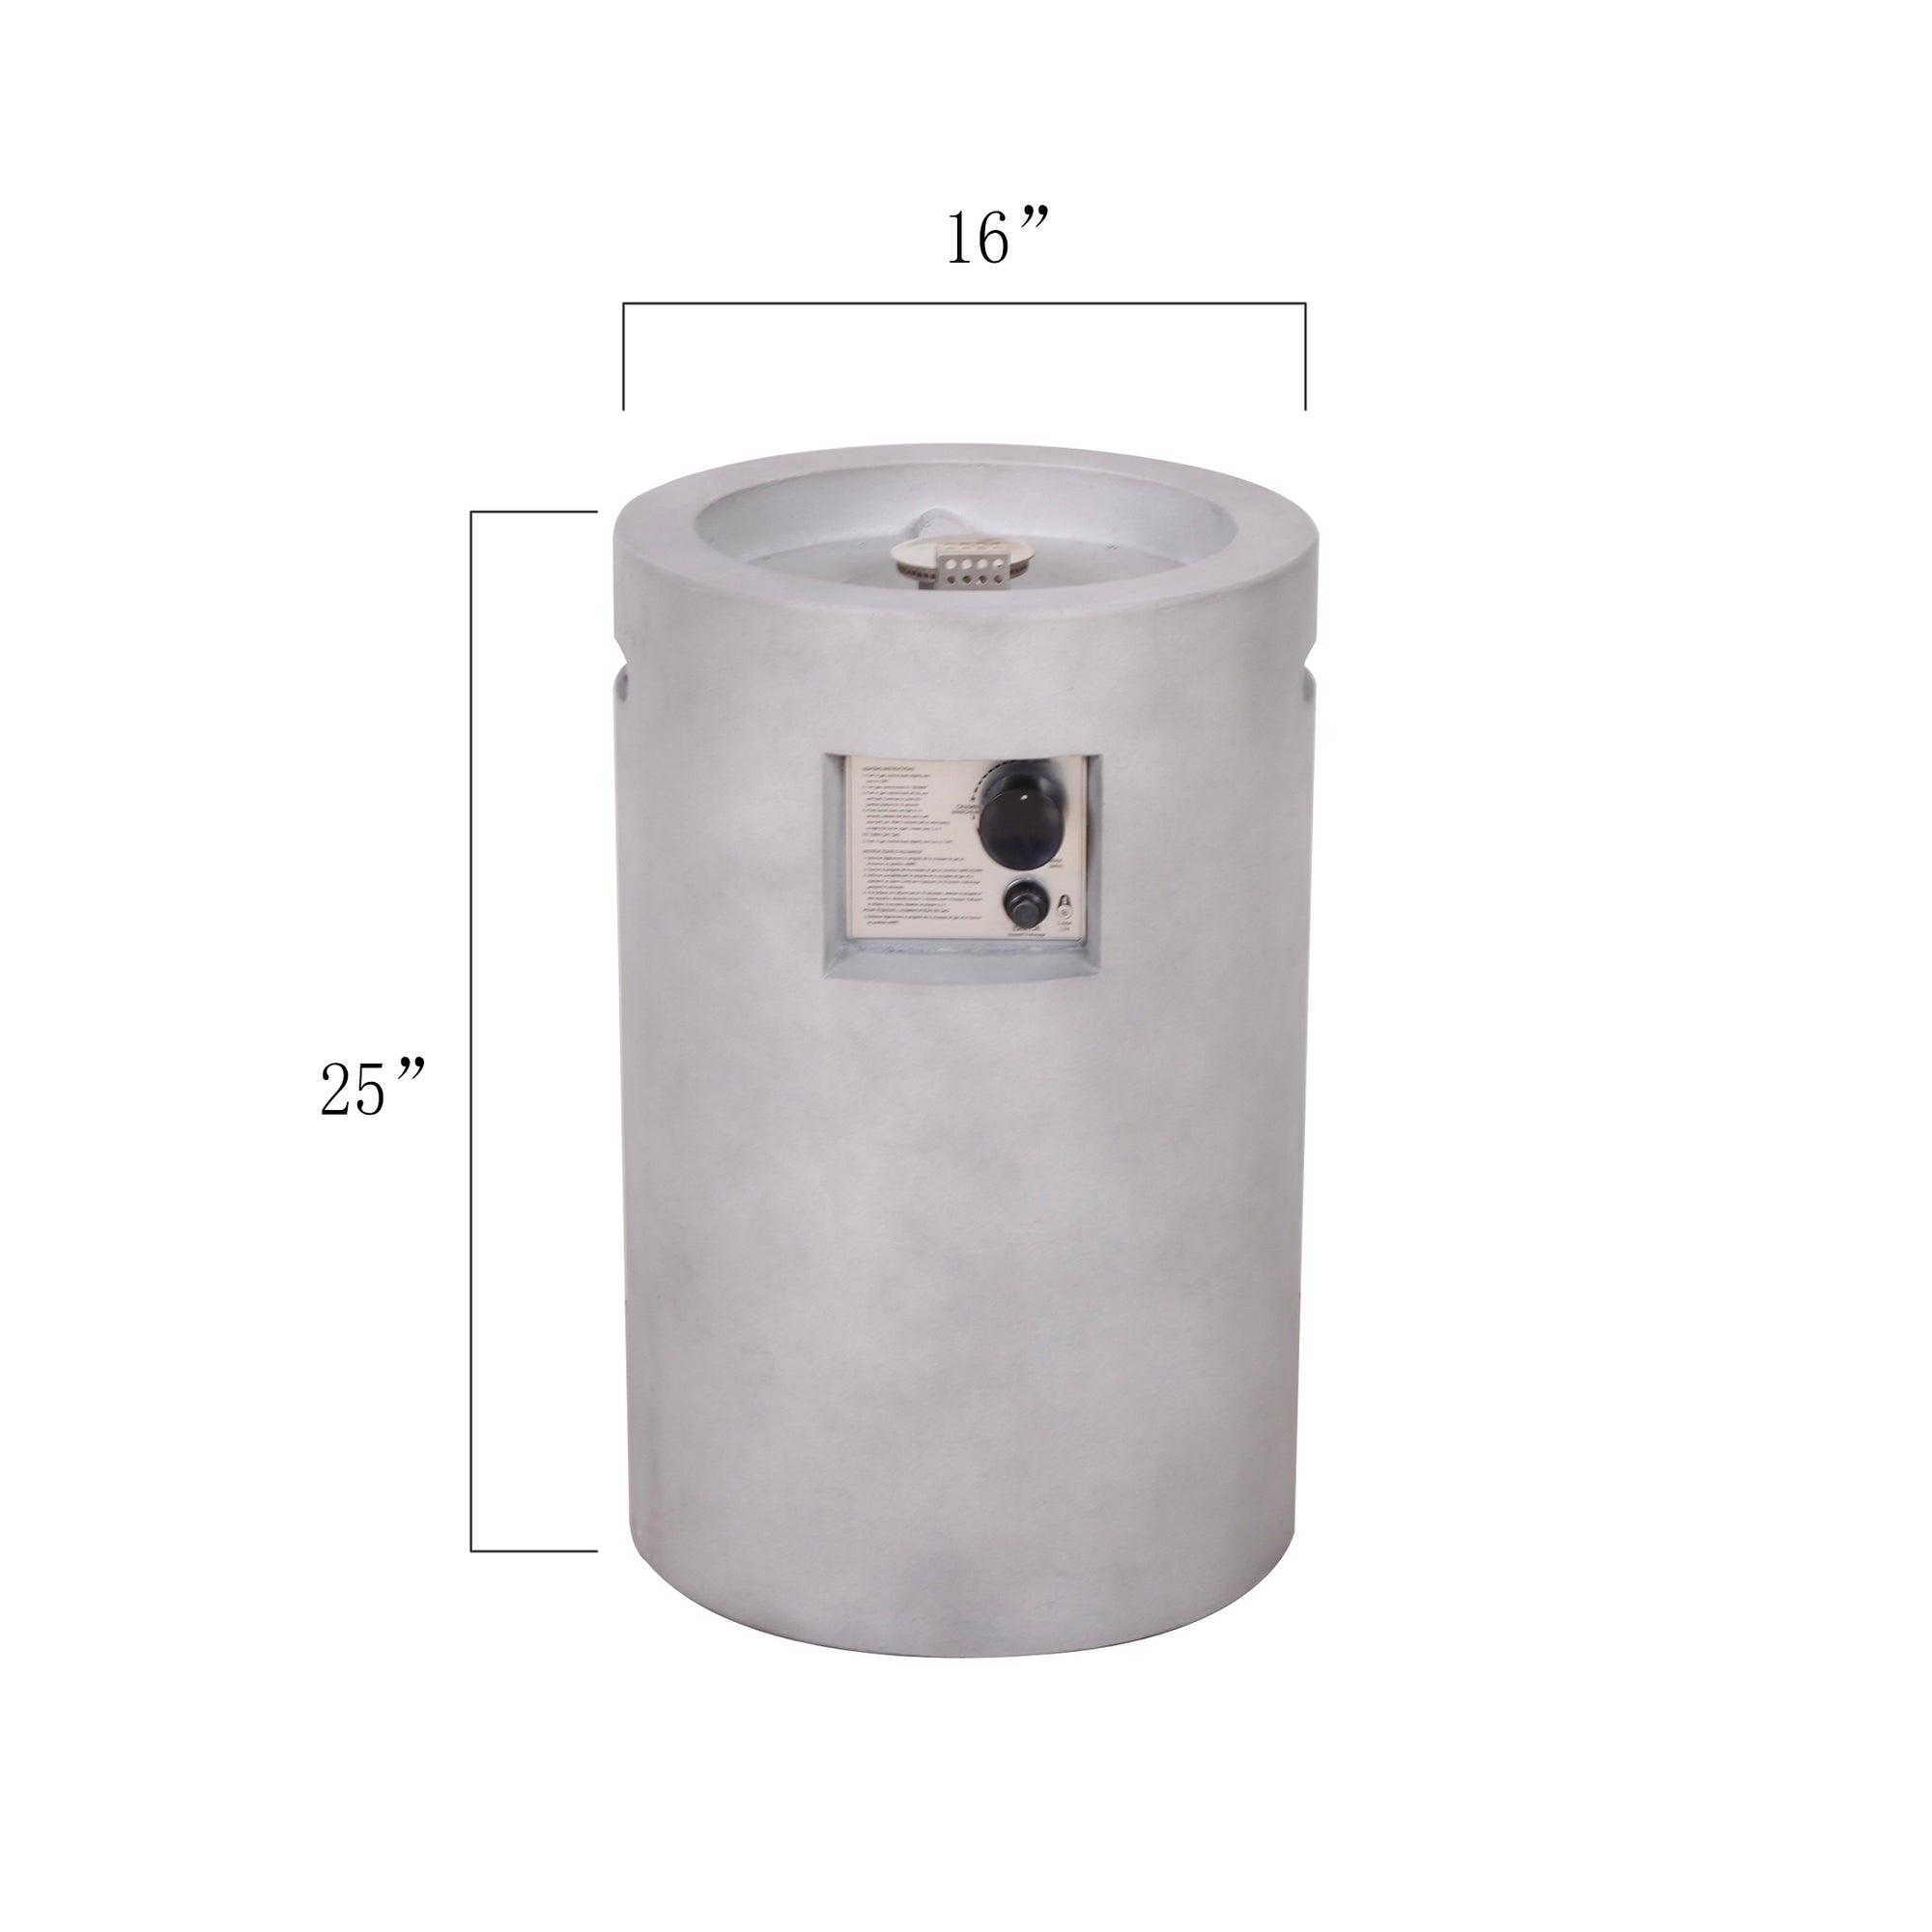 Real Concrete Cylinder 25" (63.5cm) Tall Patio Heater